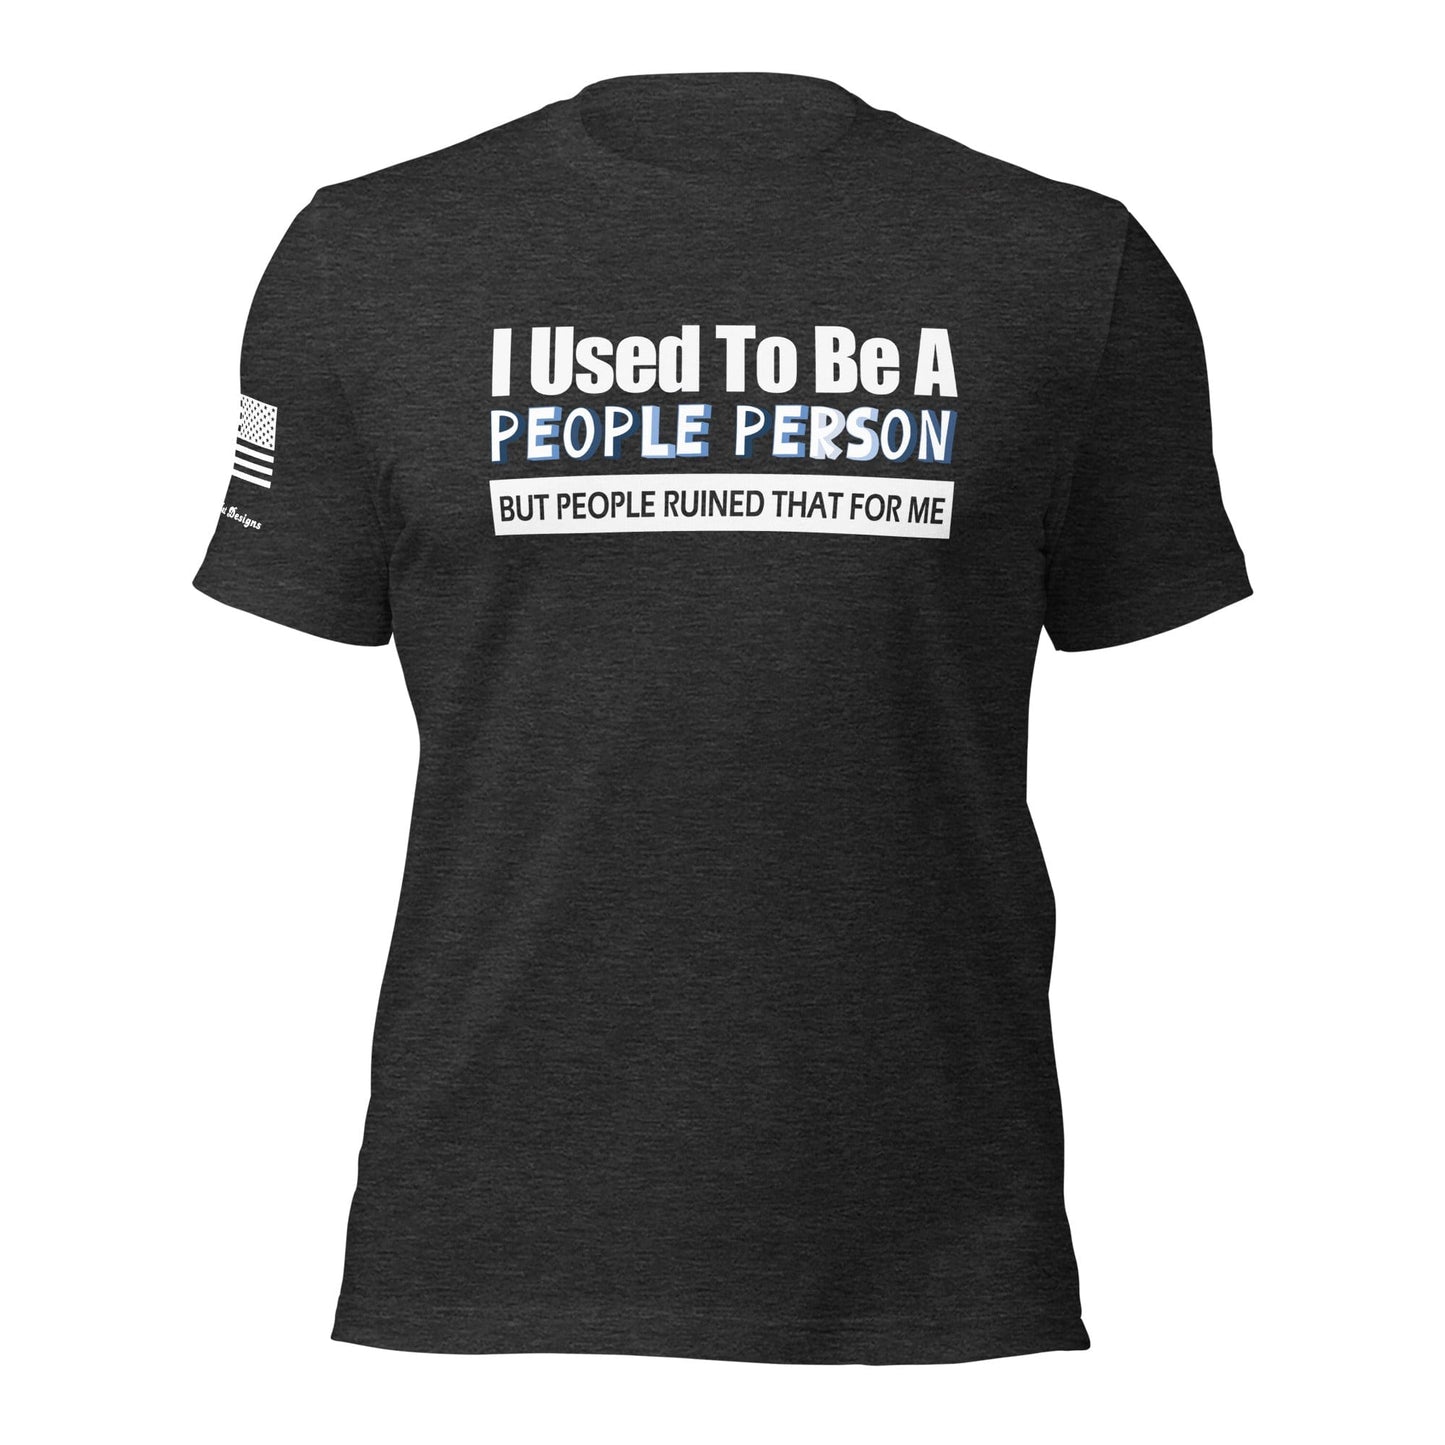 FreedomKat Designs, LLC Dark Grey Heather / S I used to be a people person t-shirt